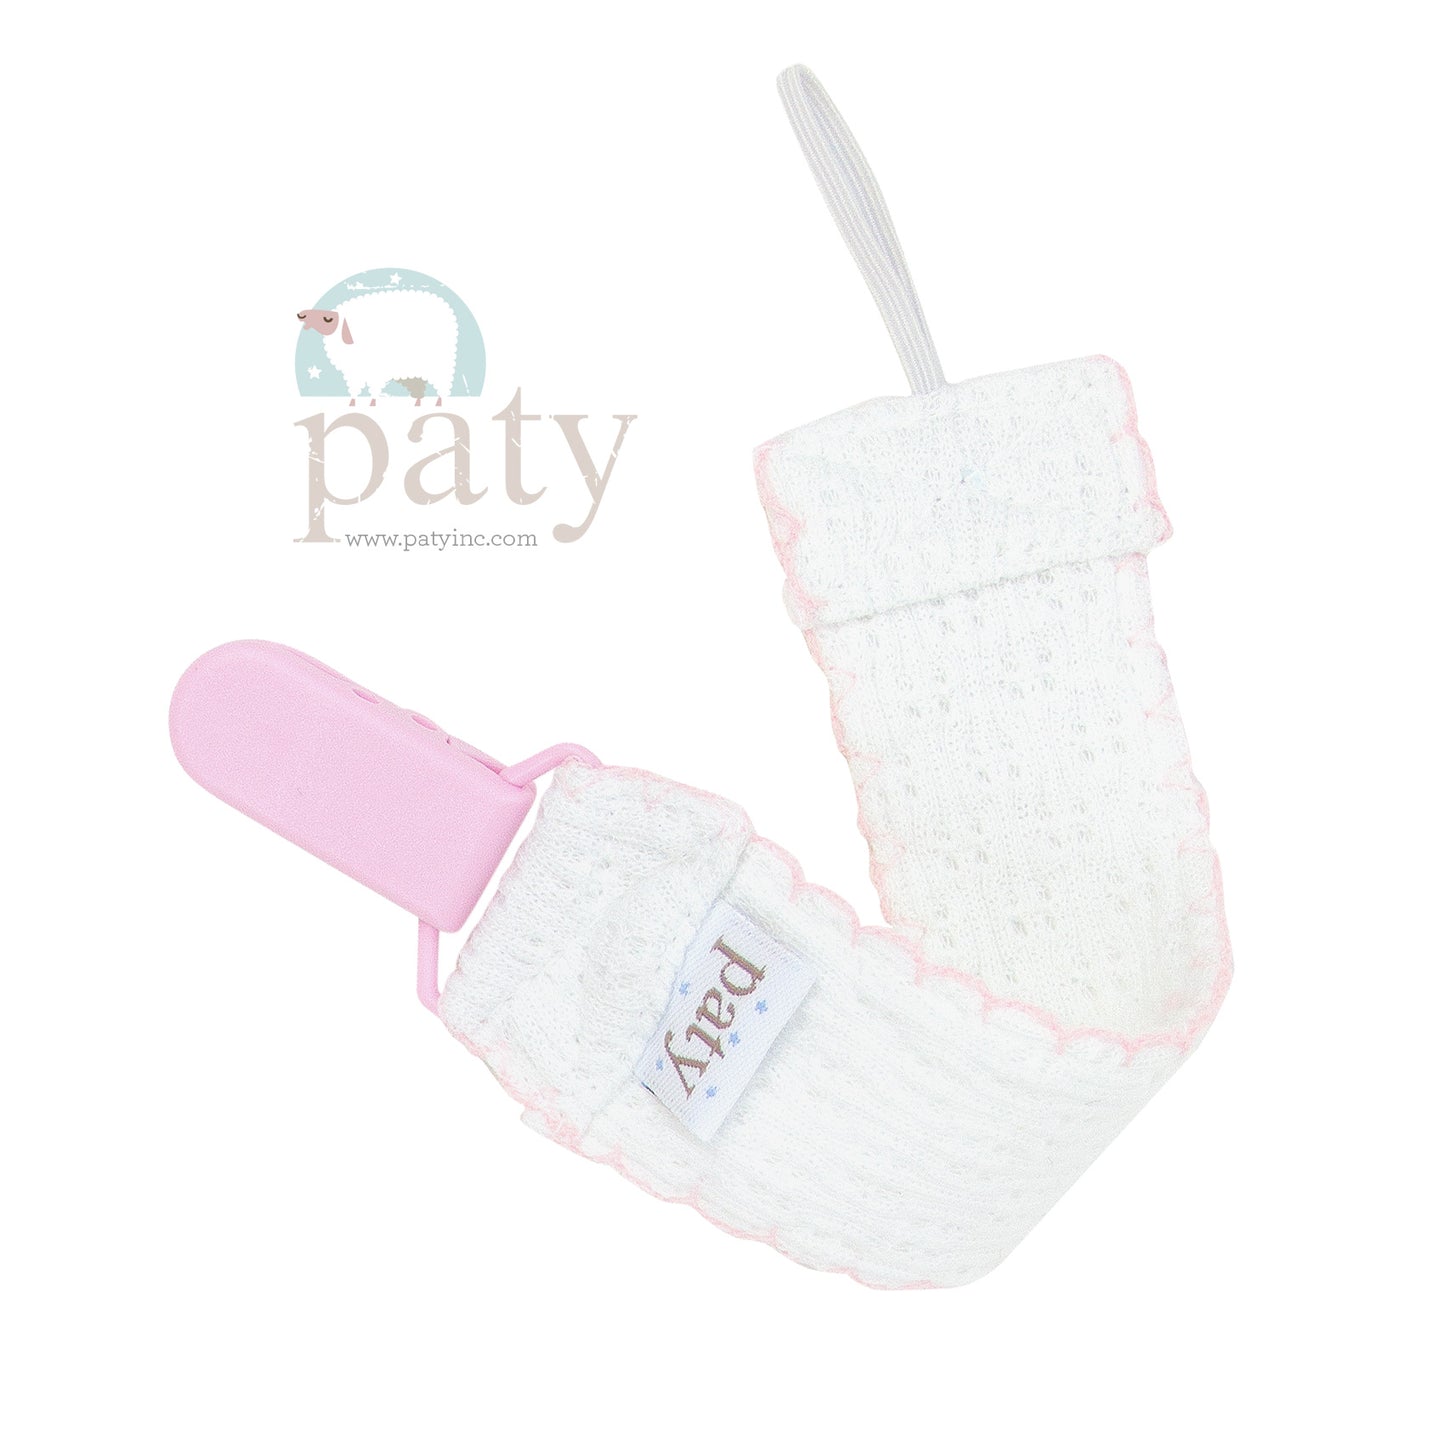 Paty Pacifier Clips